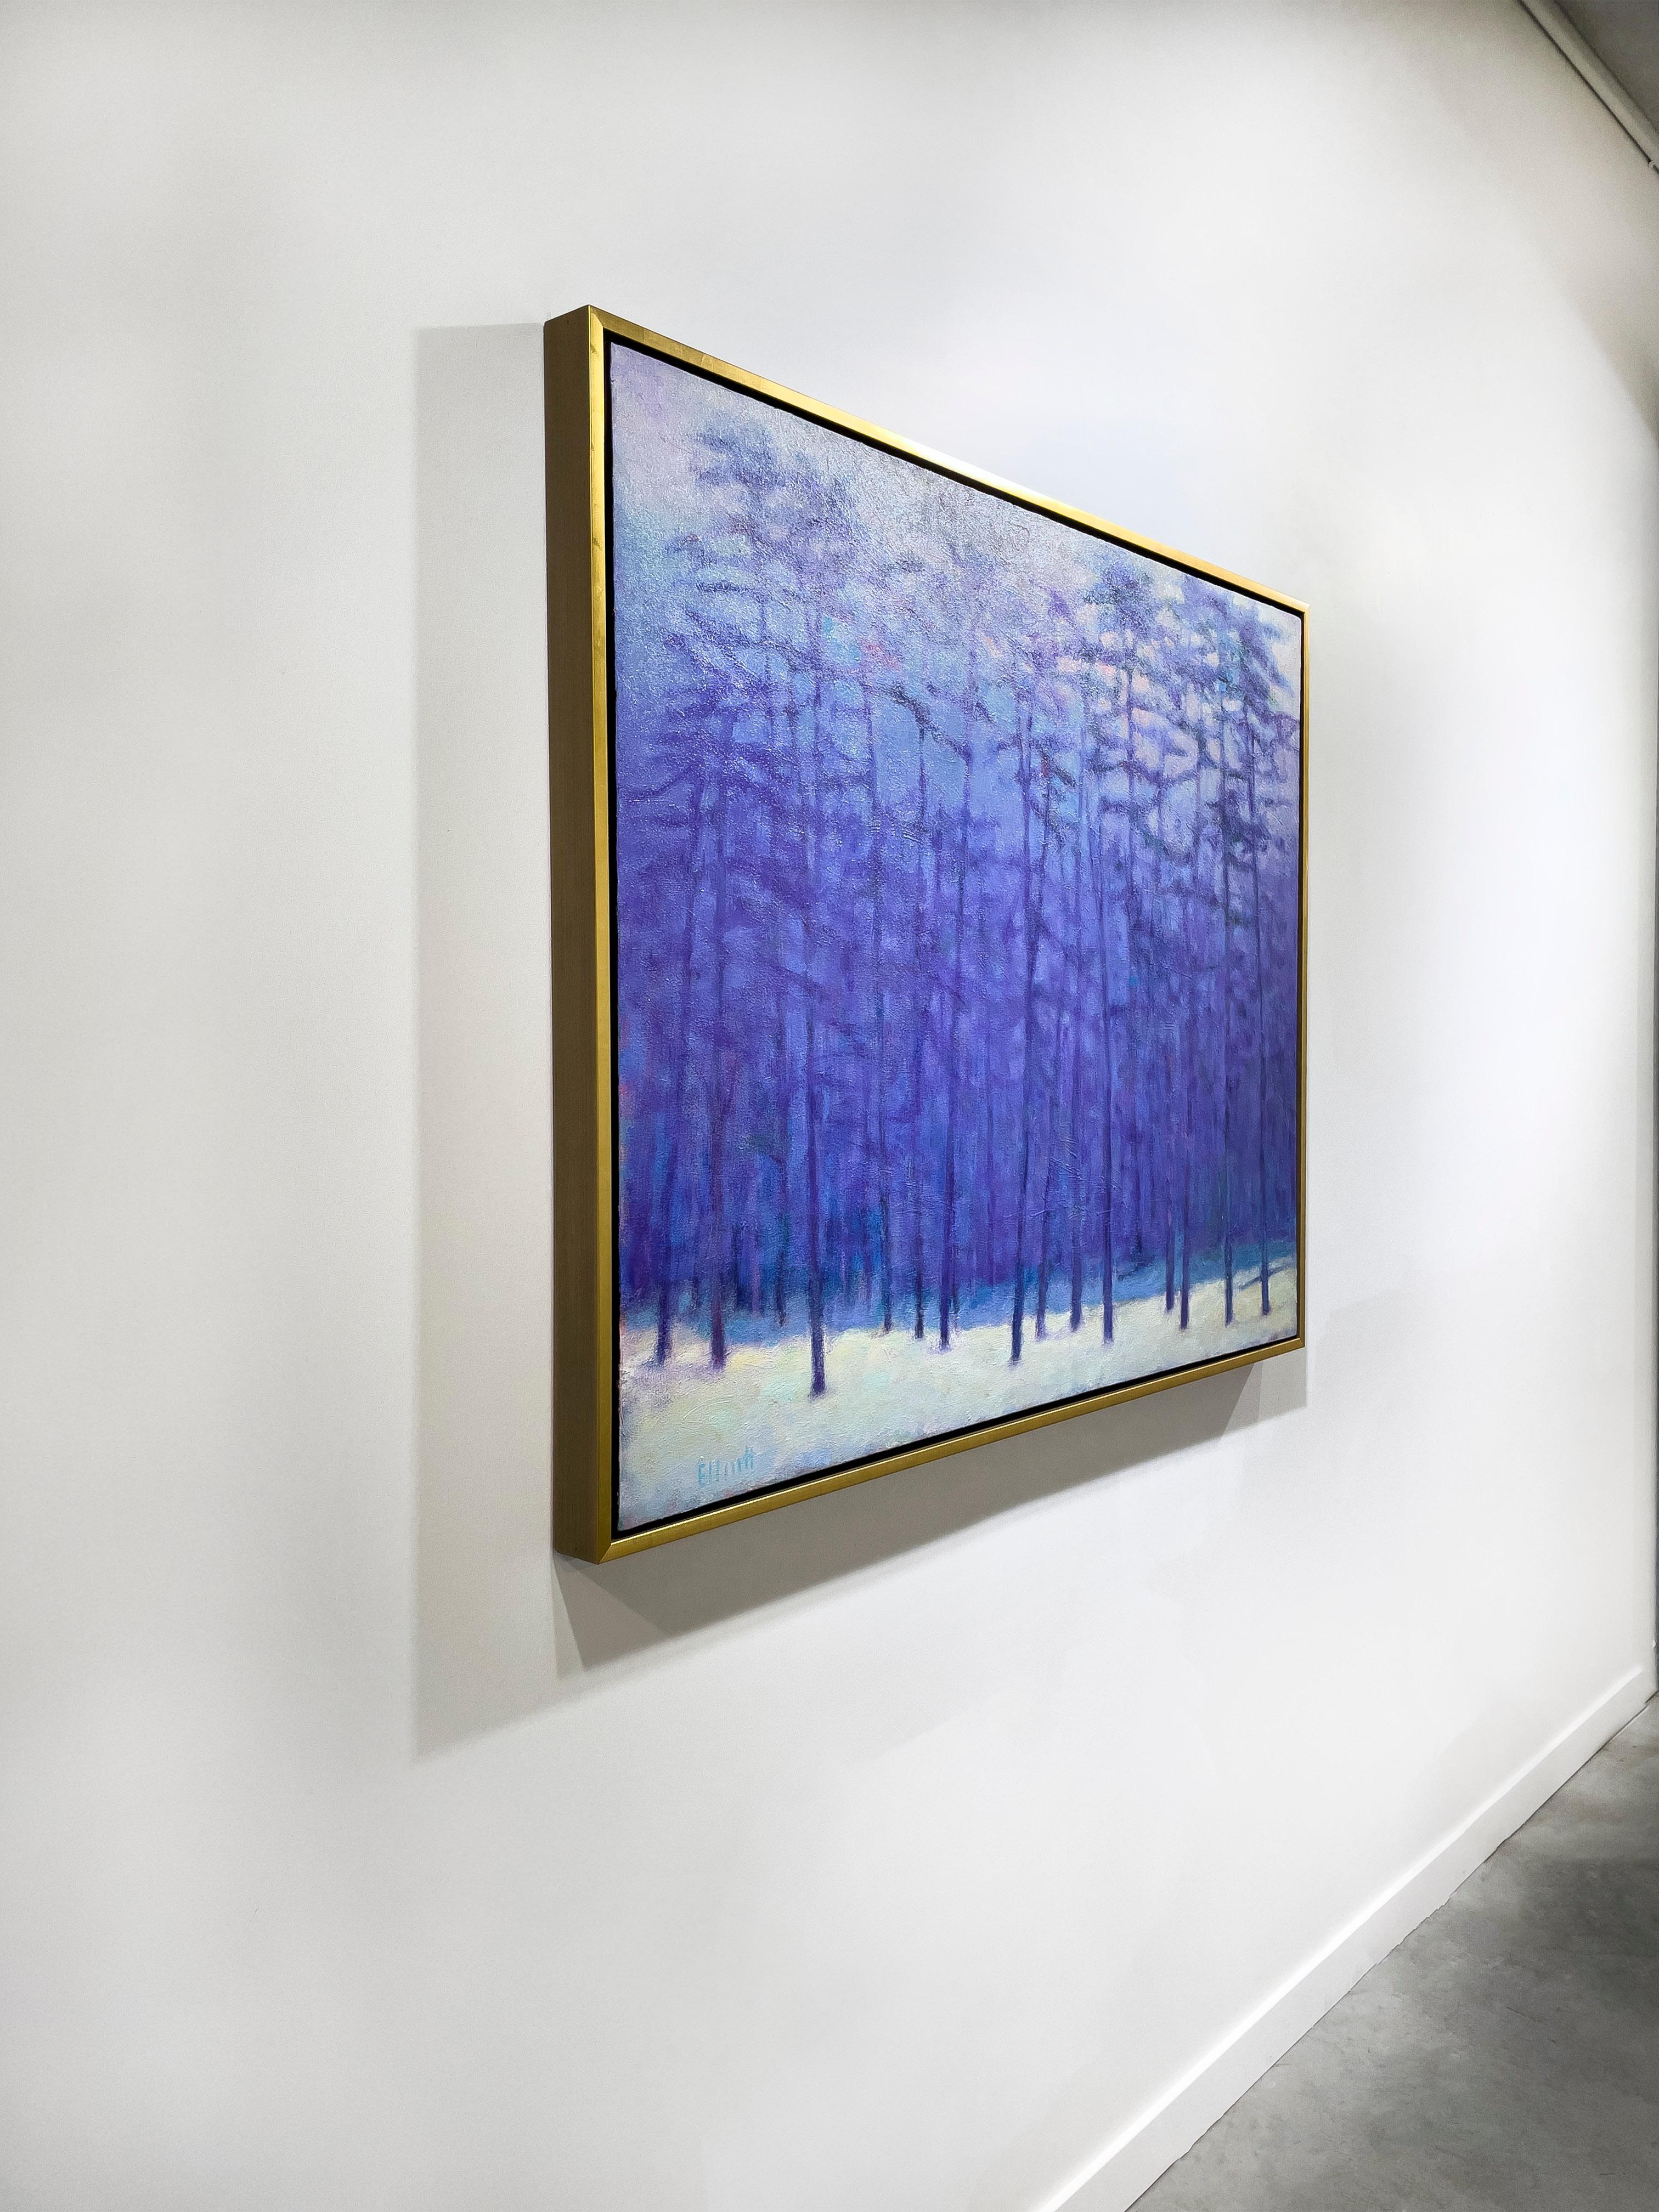 This contemporary abstract landscape painting by Ken Elliott is made with oil paint on canvas. It features a cool violet-blue palette, capturing an abstracted scene of a forest in the winter. The trees are depicted in shades of deep blue, with a